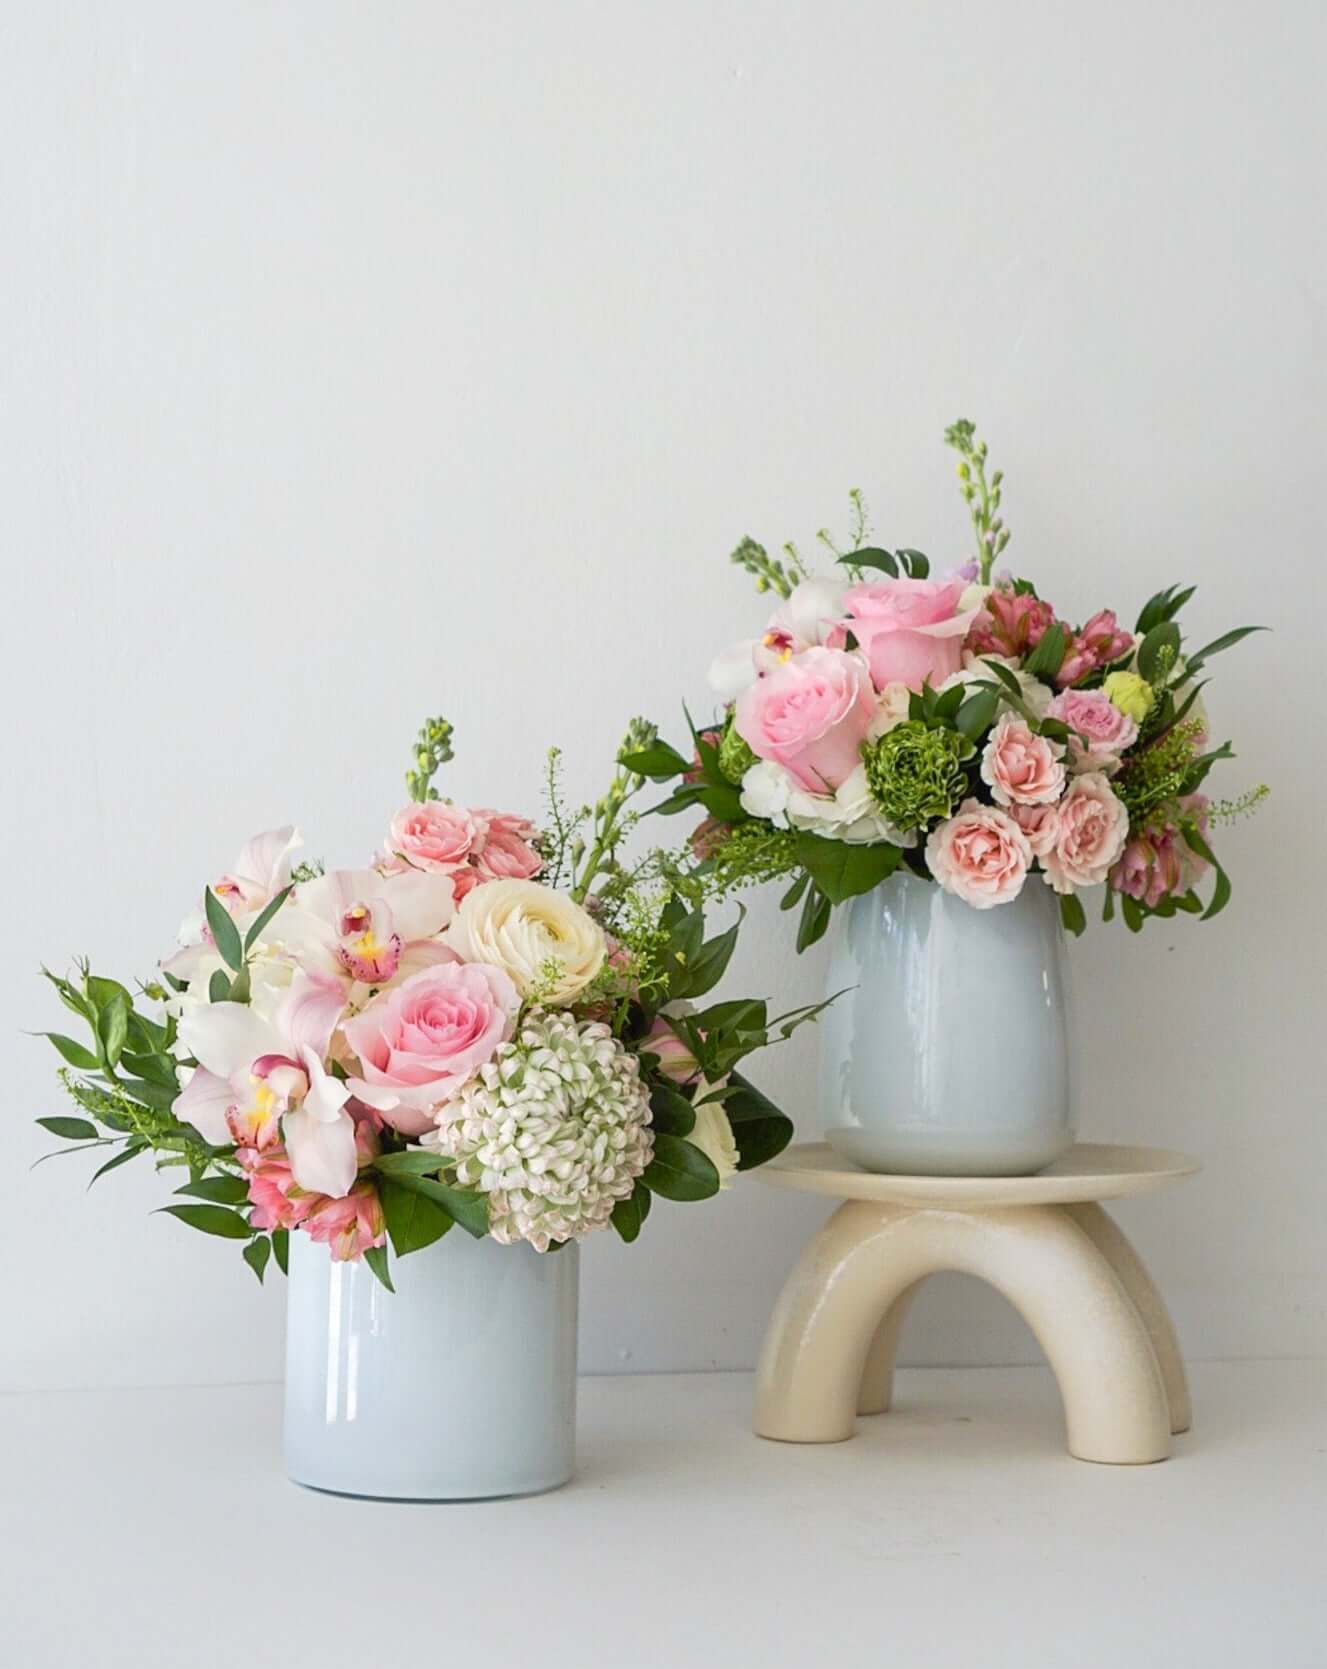 Divine pretty pastels artfully styled in our white glass vases. Approx. Overall Dimensions: 10"L x 10"H. Base Dimensions: Standard - 4.25" x 6.75". Premium 7.5" x 7.5"